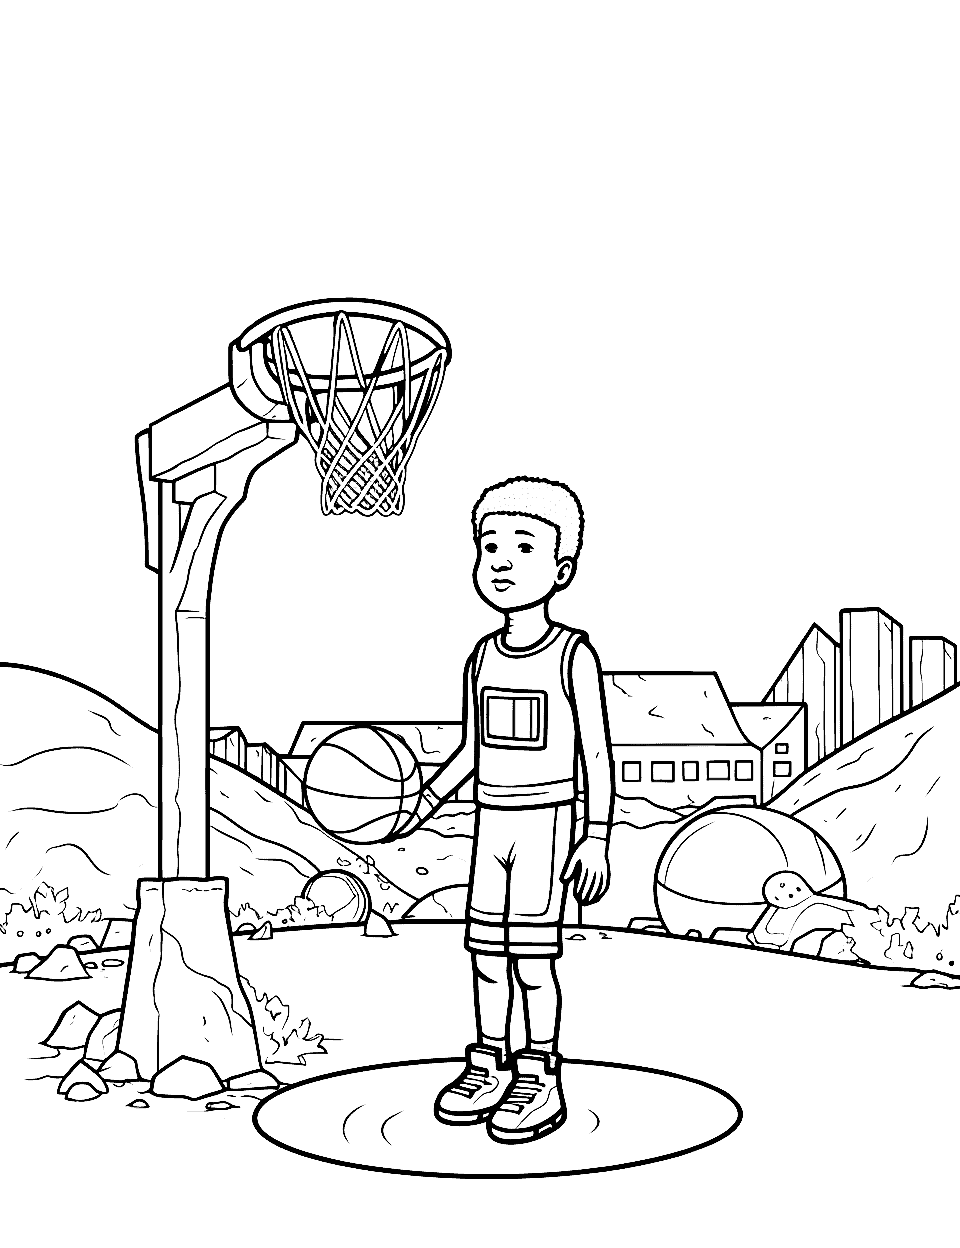 Mars Colony Hoops Basketball Coloring Page - A Mars colony scene with a child playing basketball outside the station.